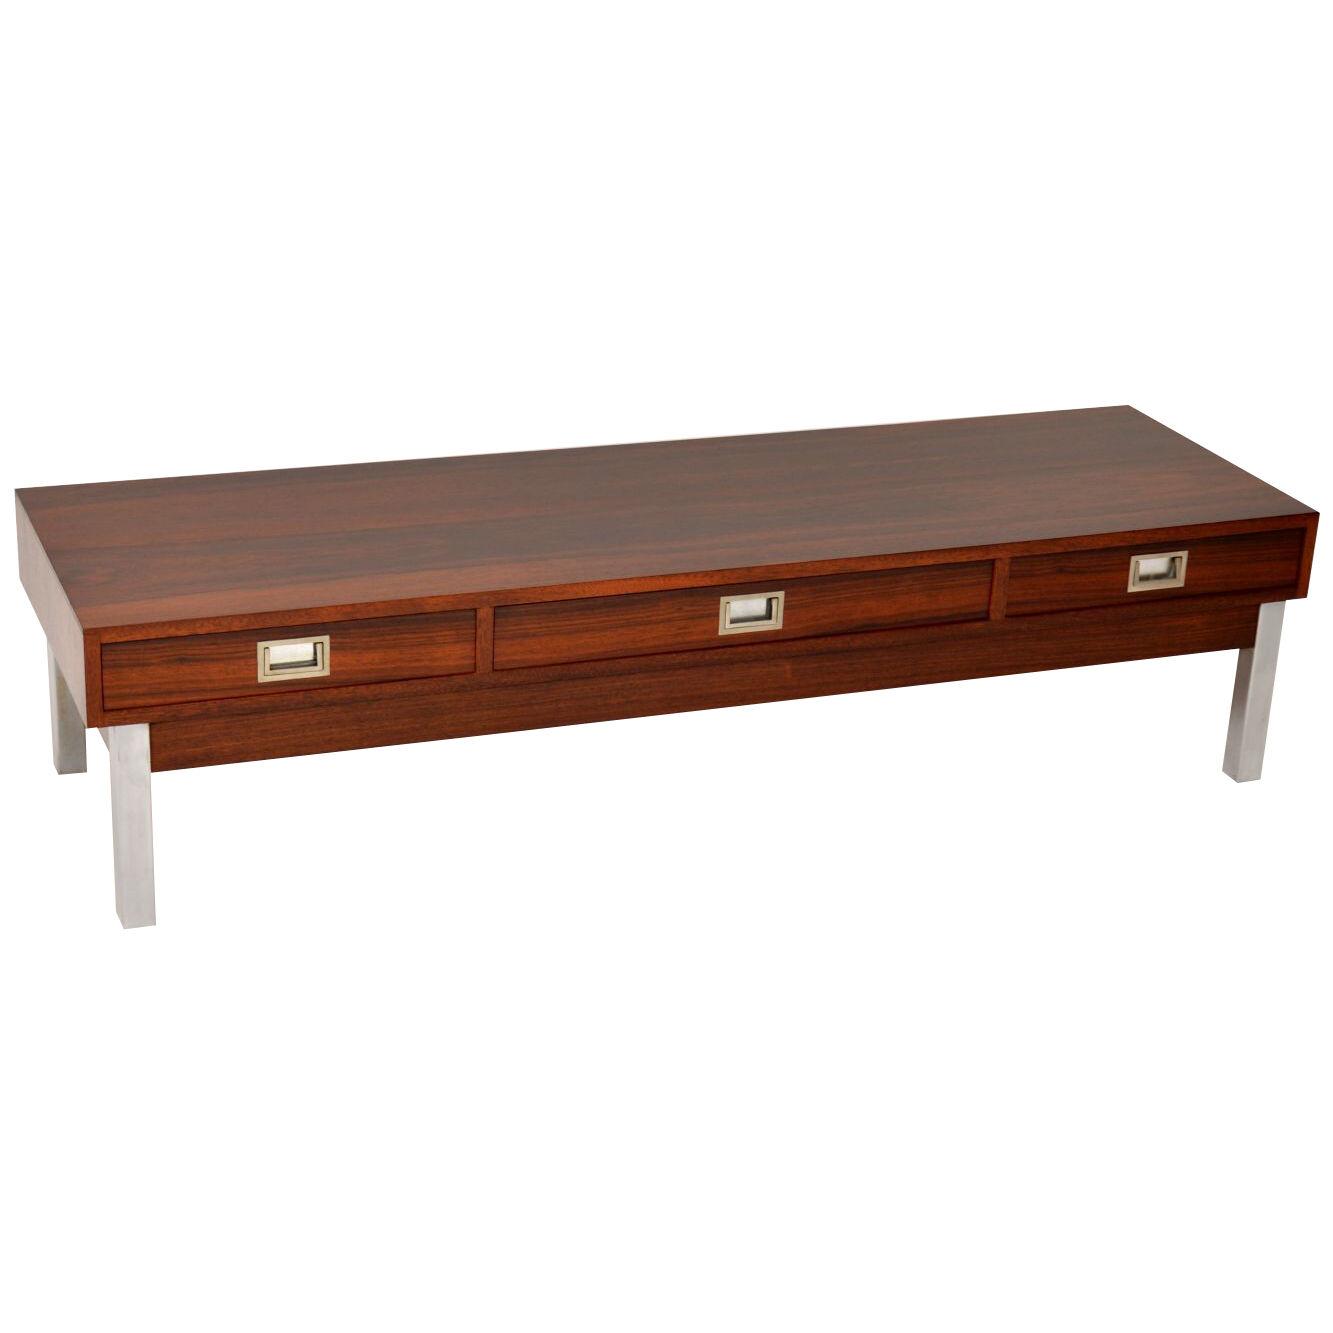 1960's Rosewood Coffee Table by Greaves & Thomas